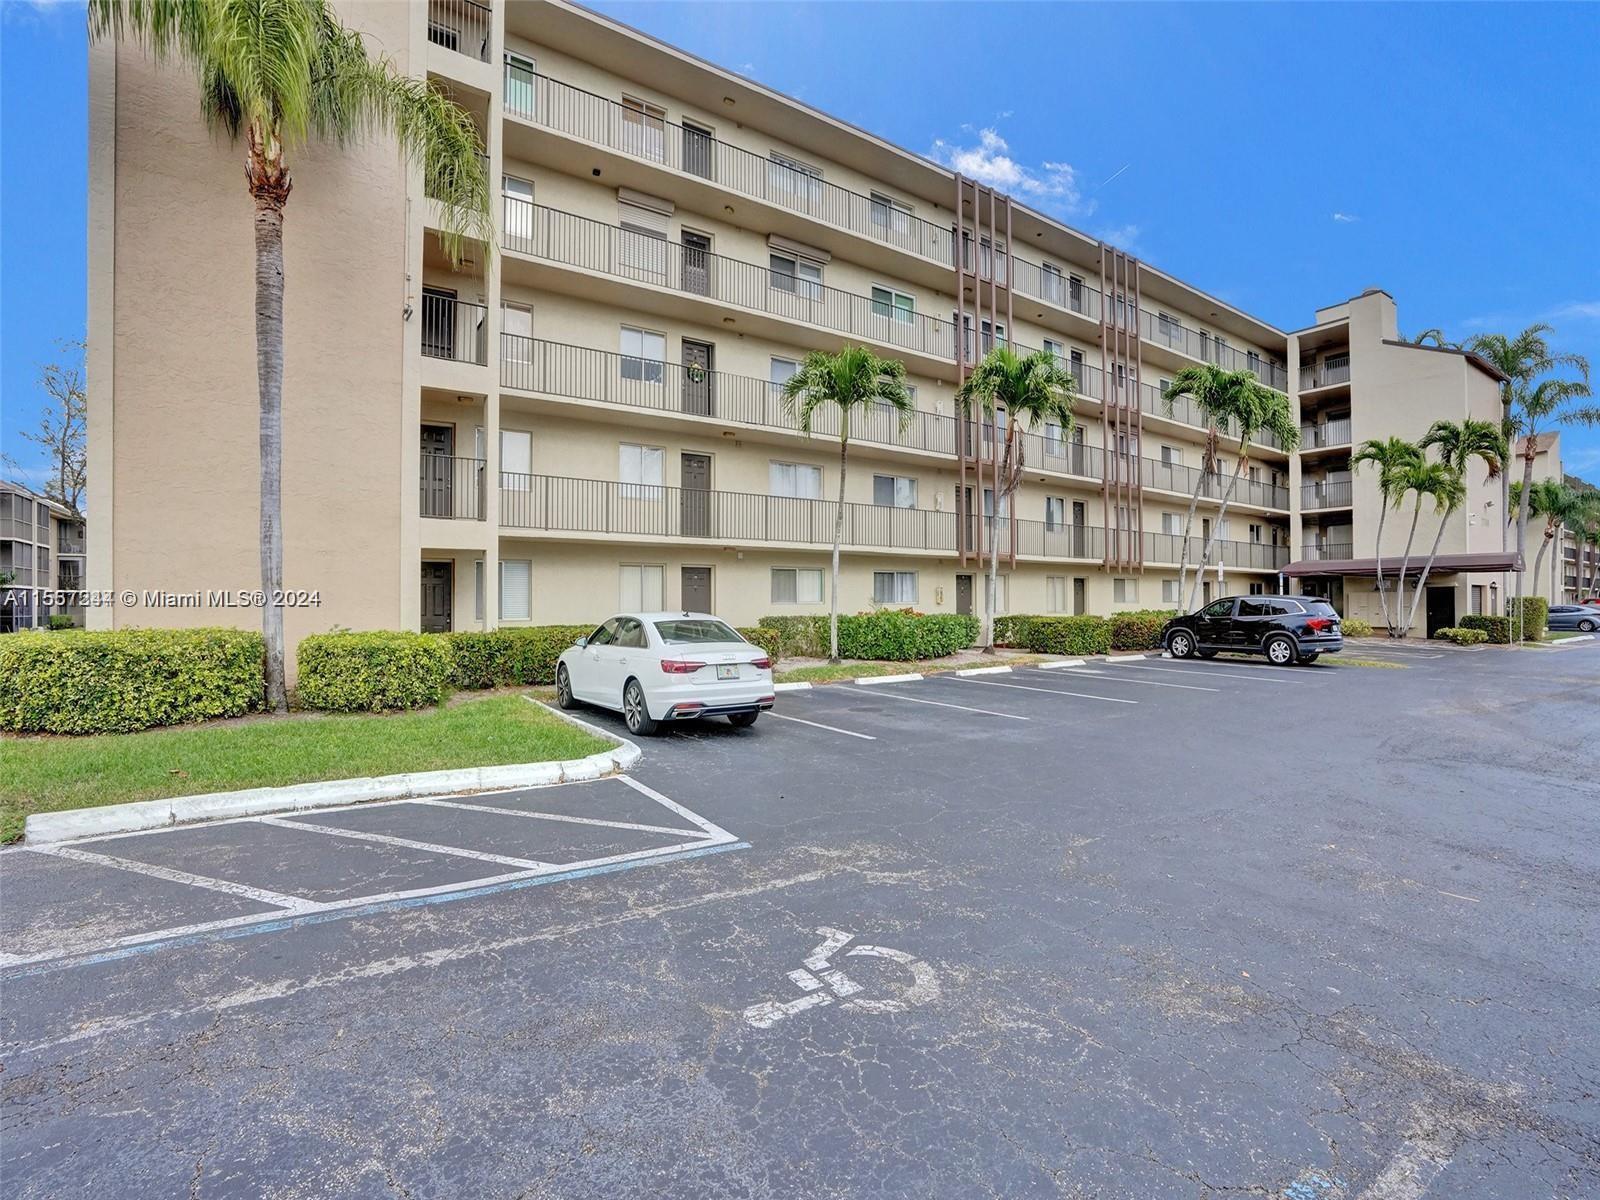 Photo of 7740 NW 50th St #210 in Lauderhill, FL